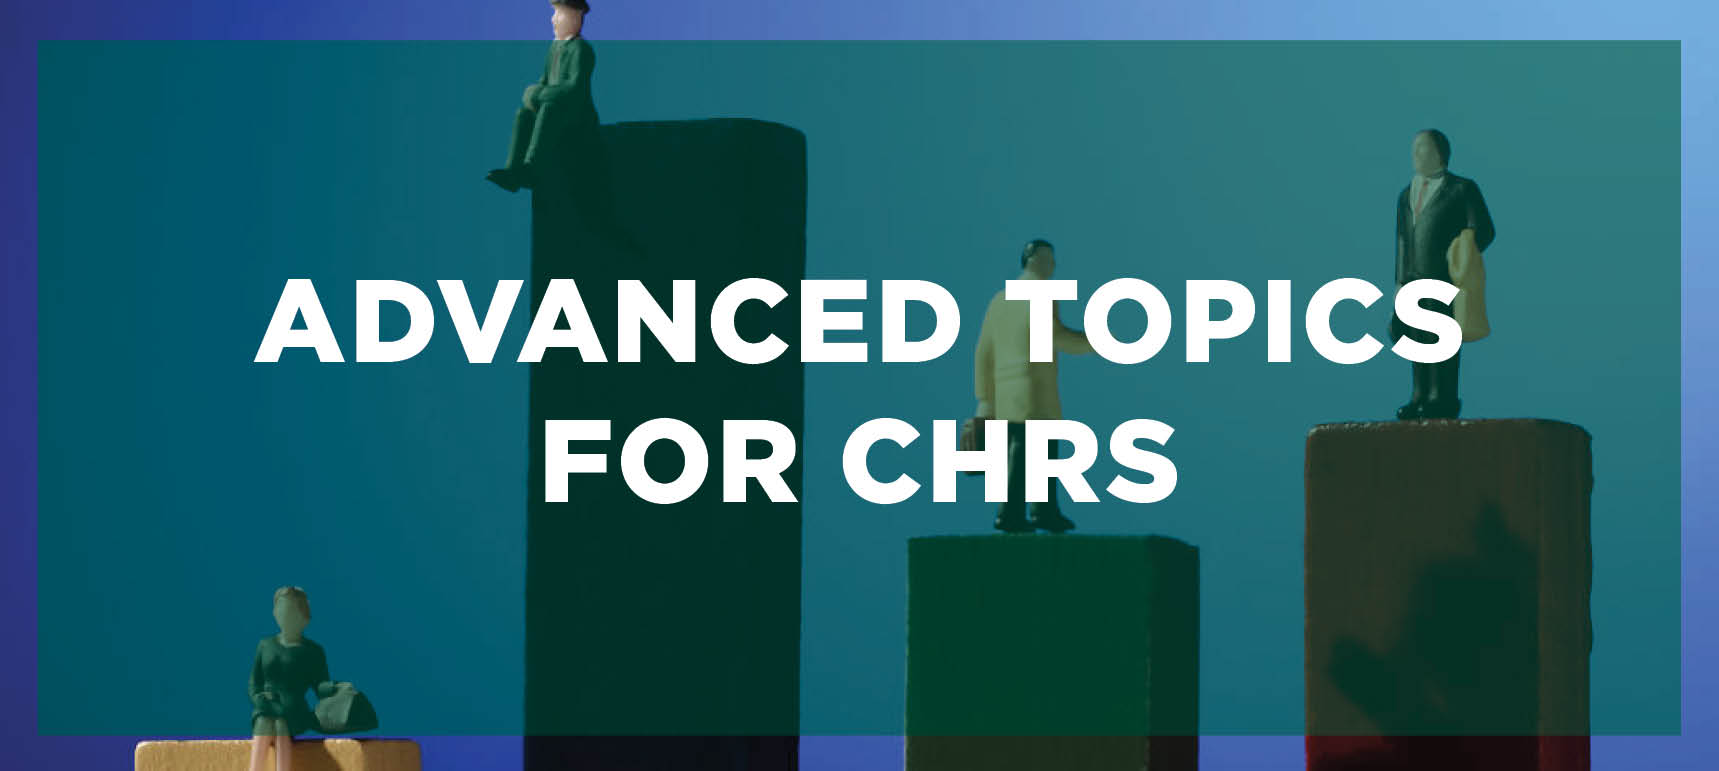 Learn more about the Advanced Topics for CHRS program